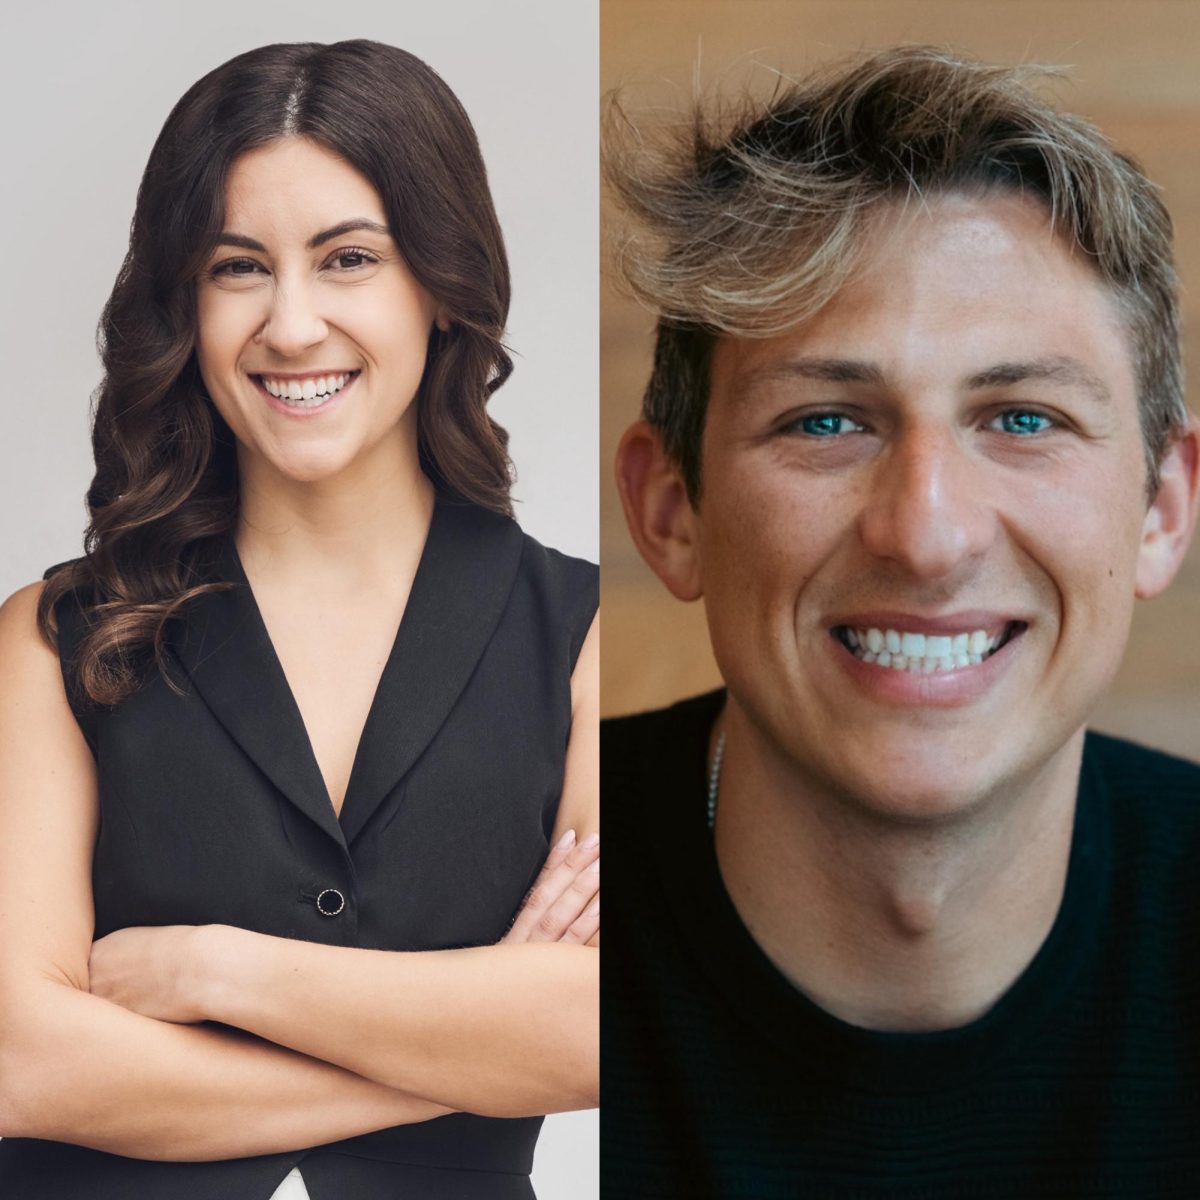 Michigan State University graduates Haley Kluge and Nathaniel Gaynor are recognized on this years Forbes 30 Under 30 list. Photo credit: Haley Kluge and Nathaniel Gaynor